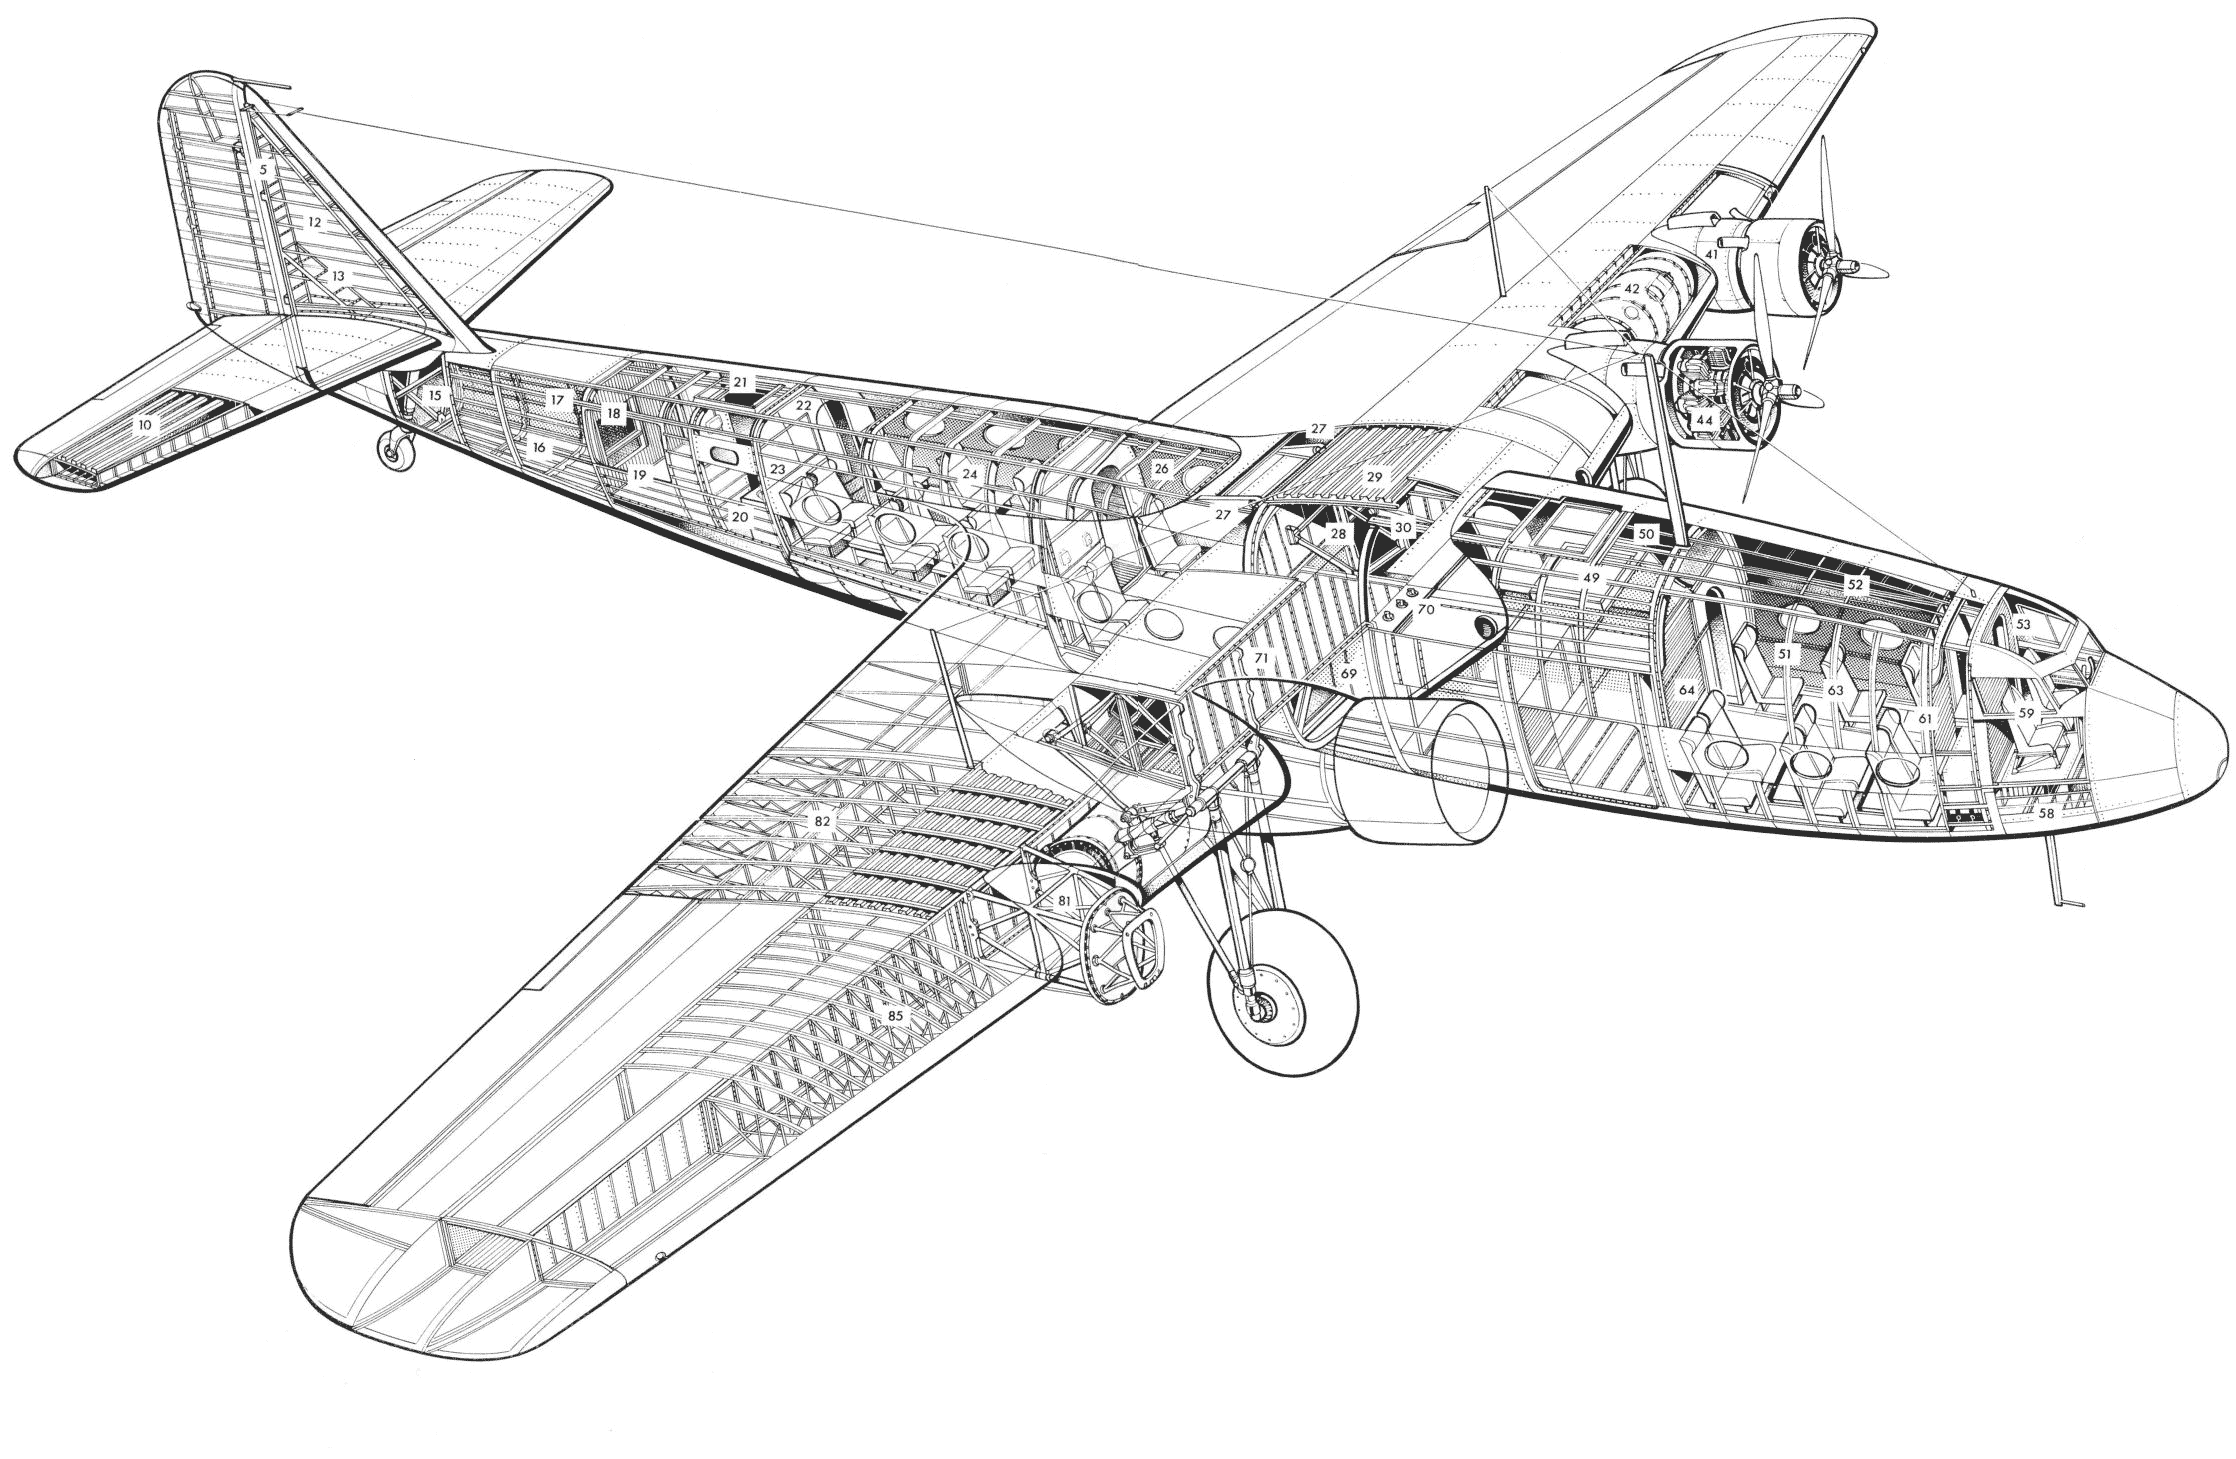 Armstrong Whitworth Ensign cutaway